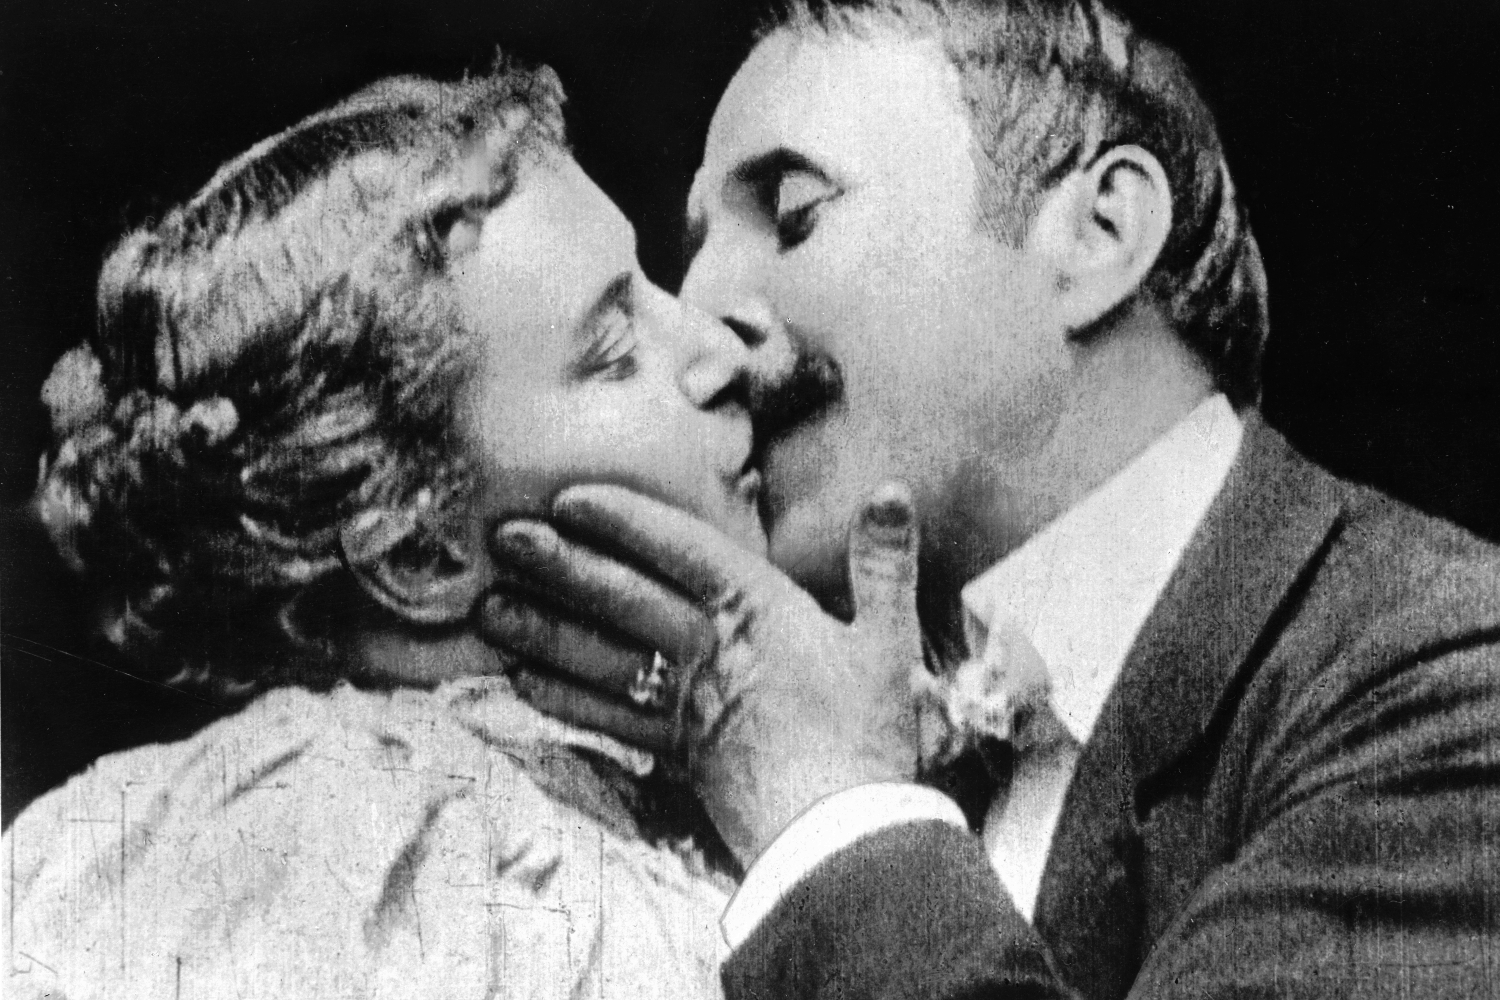 May Irwin and John C Rice stars of the Broadway play 'The Kiss', reenact the play's famous kissing scene for the Edison Company's cameras.